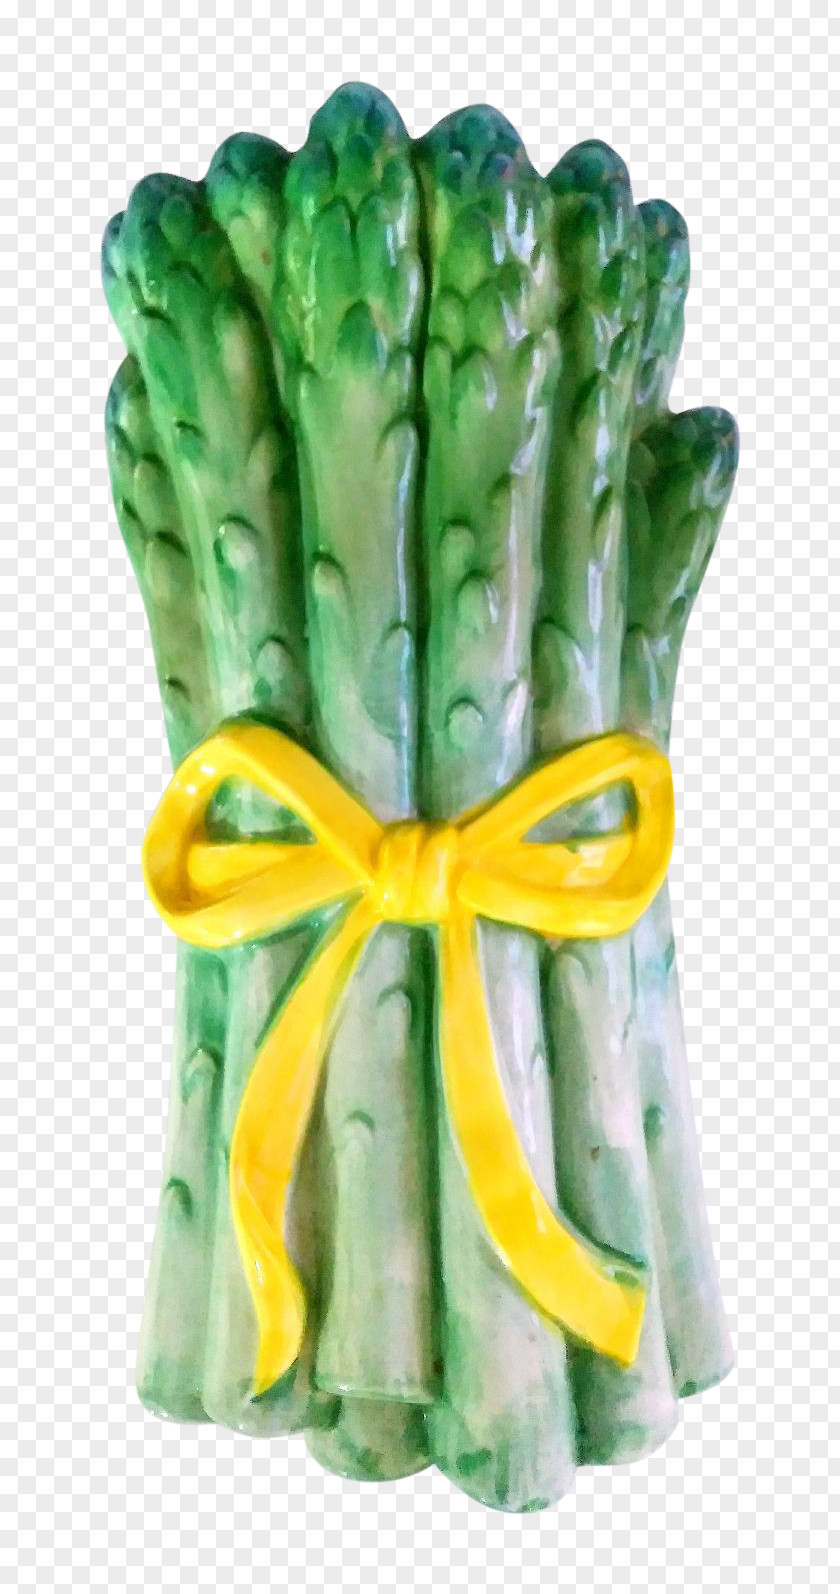 Food Asparagus Picture Cartoon PNG